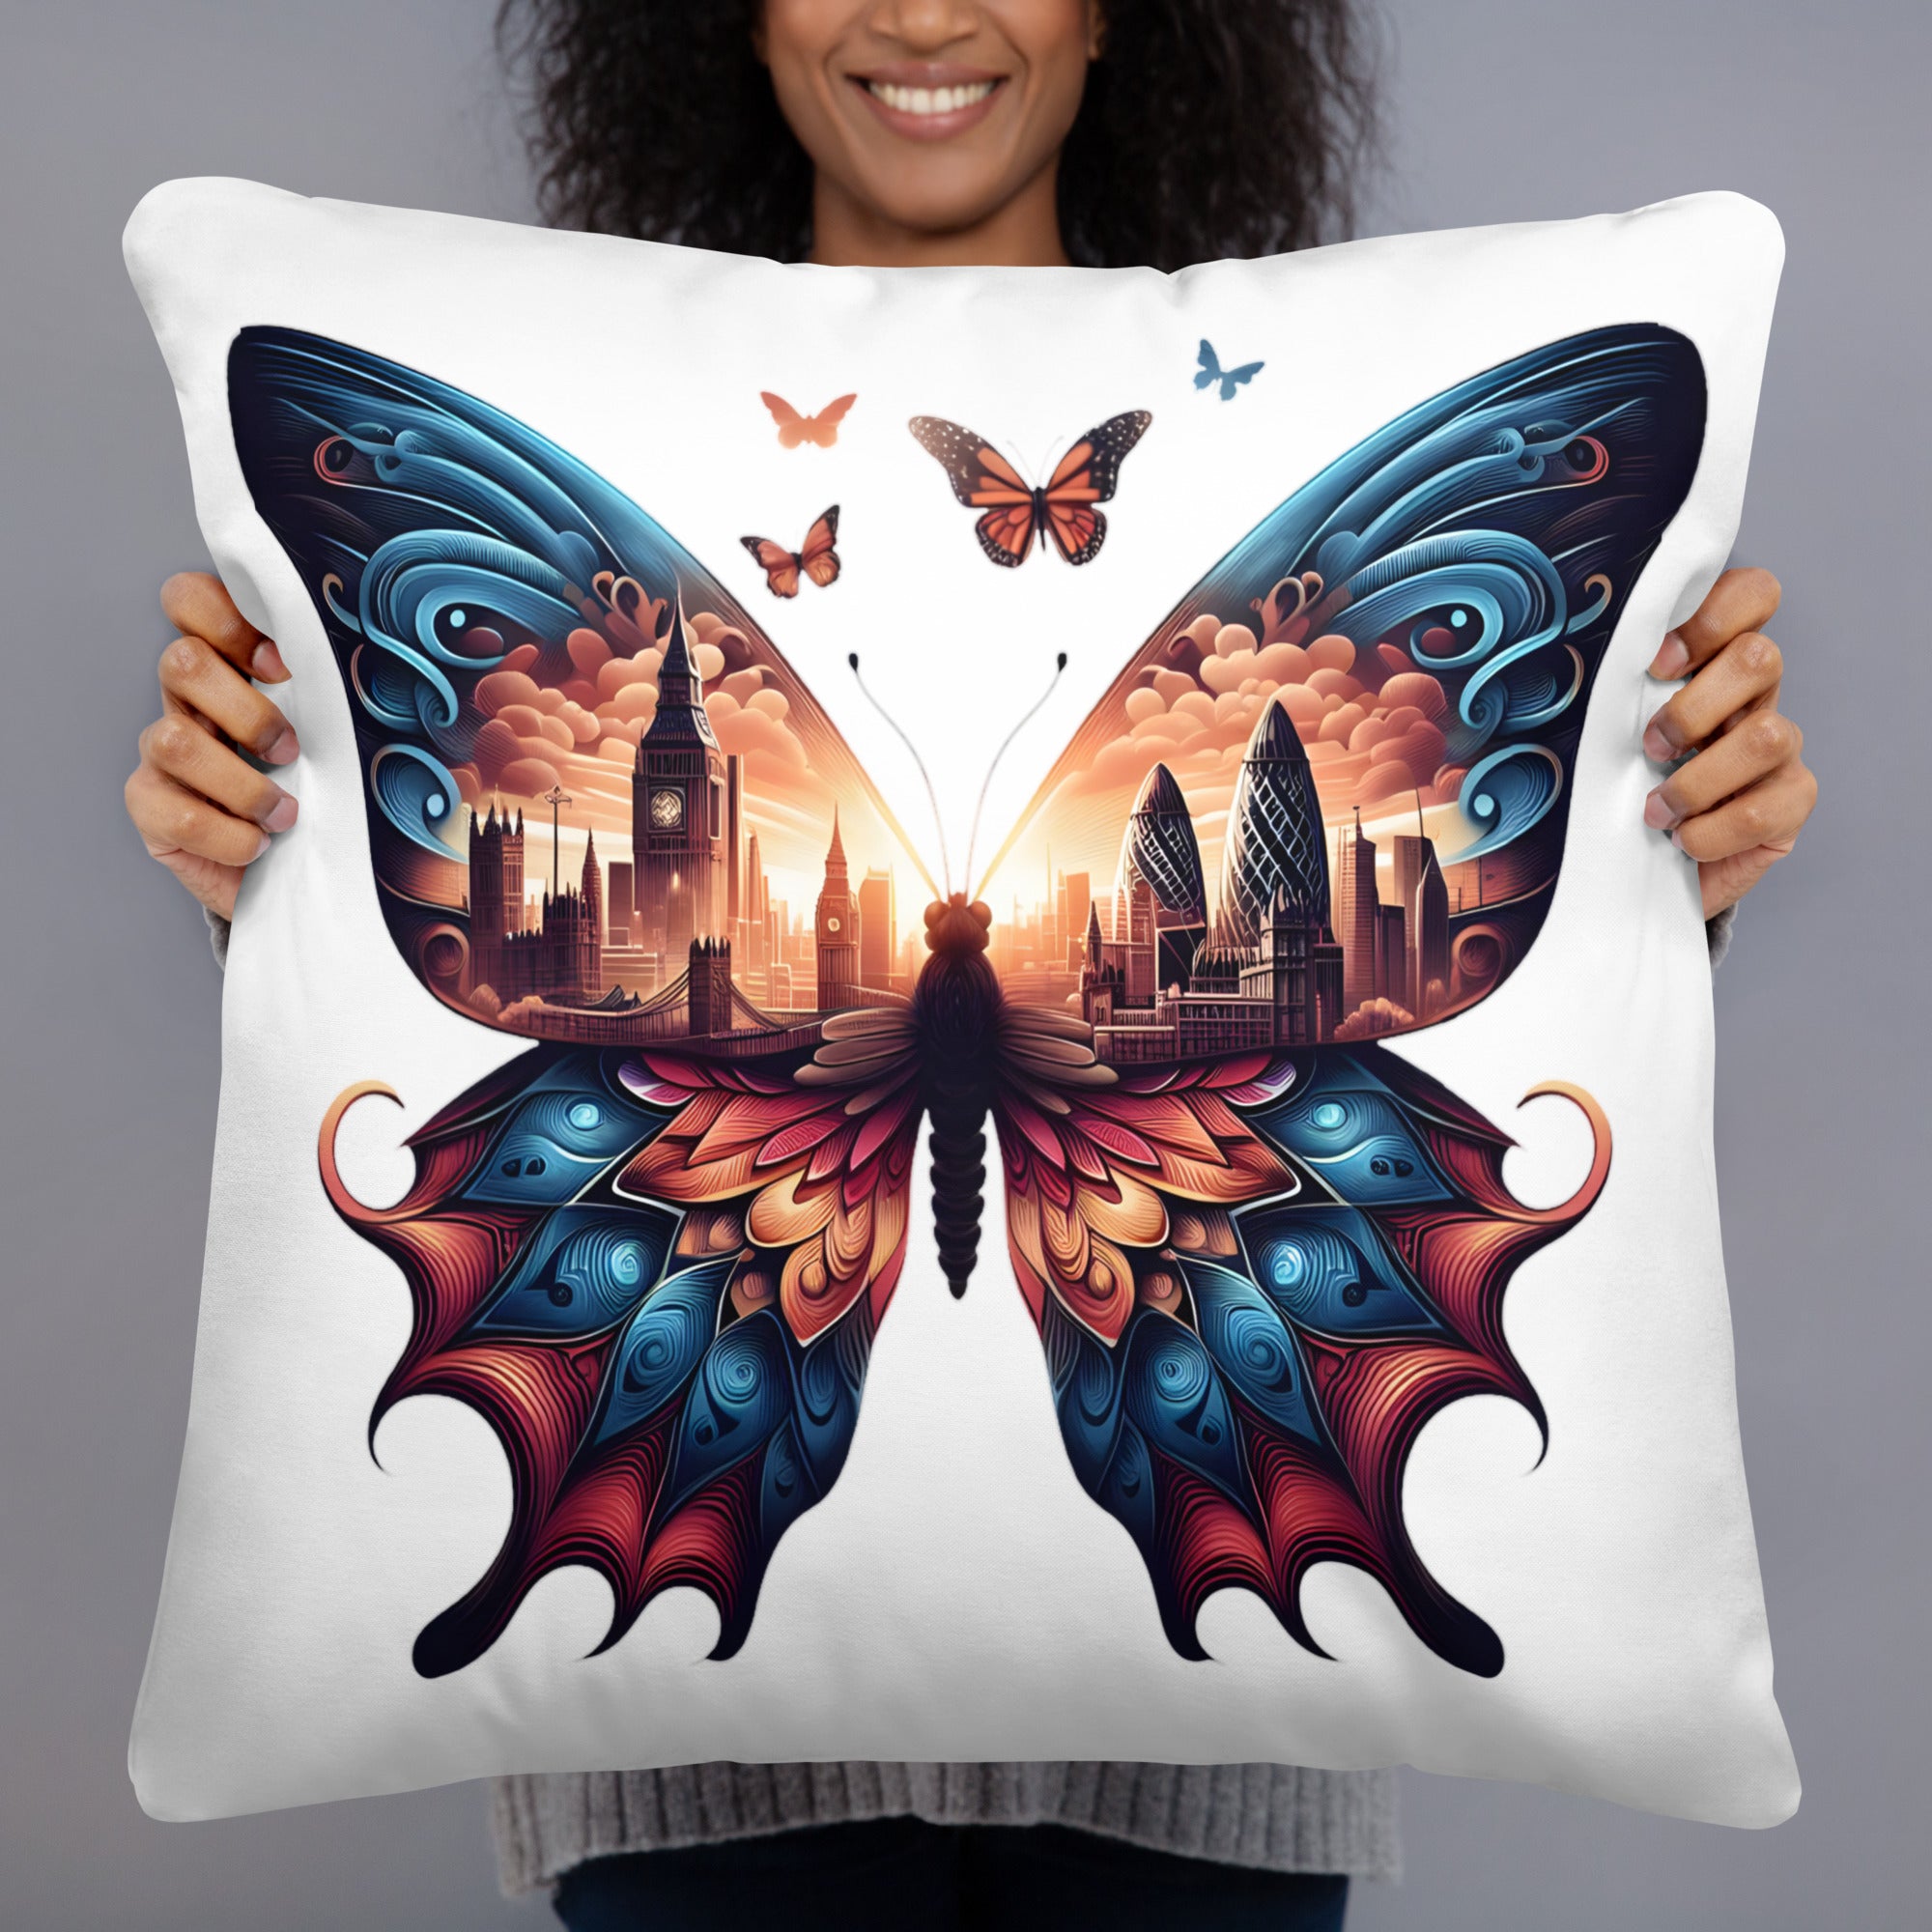 London Butterfly Cushion: City Pillow Design for Home Decor and Lifestyle